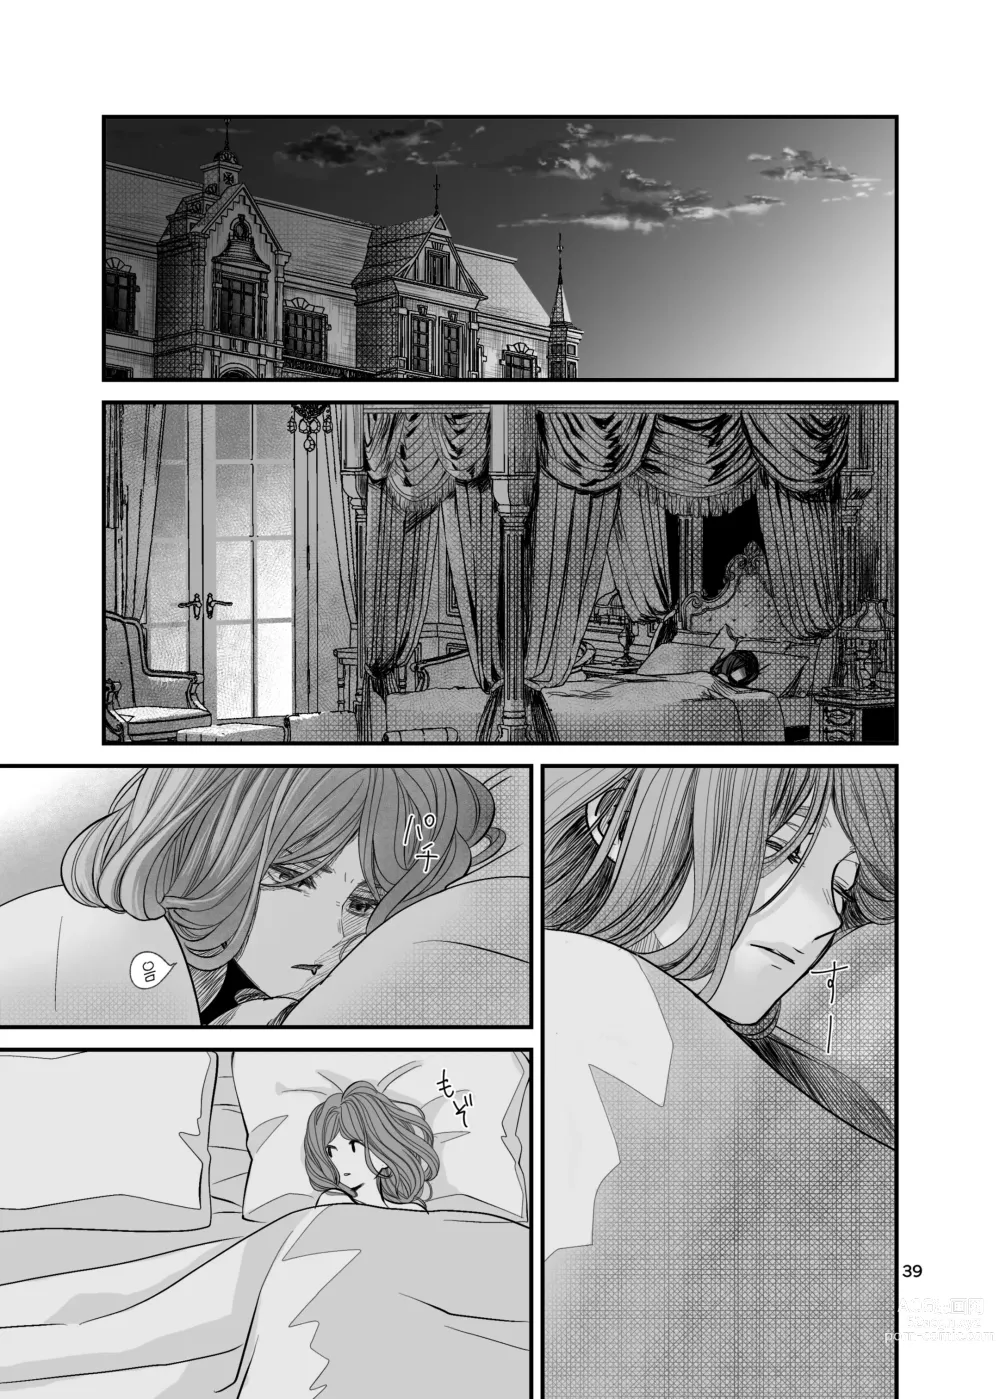 Page 39 of doujinshi 수인 영애와 혼약자